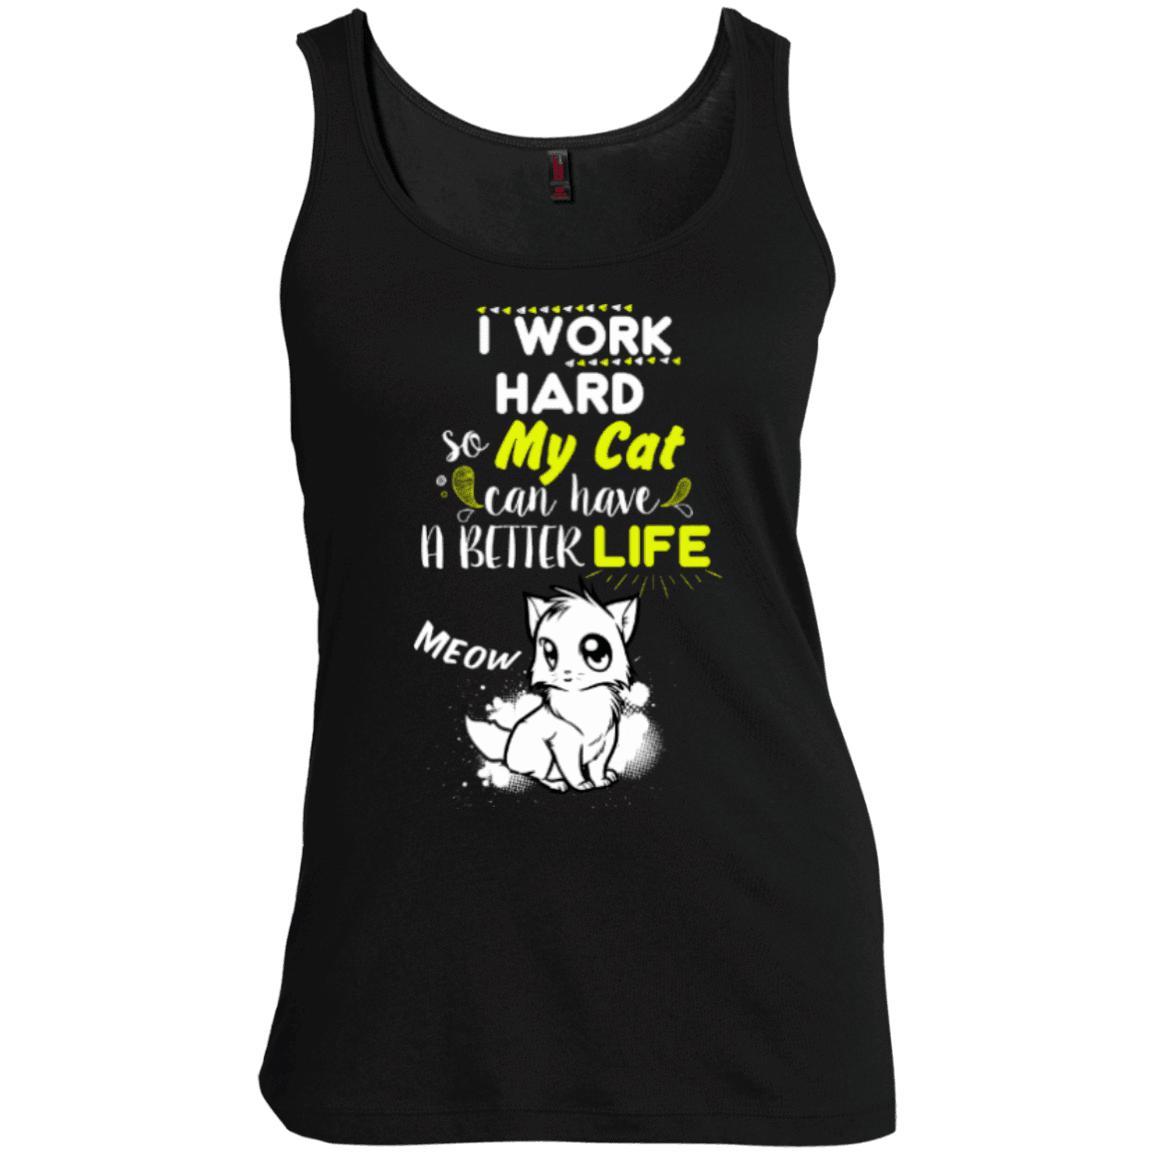 Cat Tee - I Work Hard So My Cat Can Have A Better Life - CatsForLife